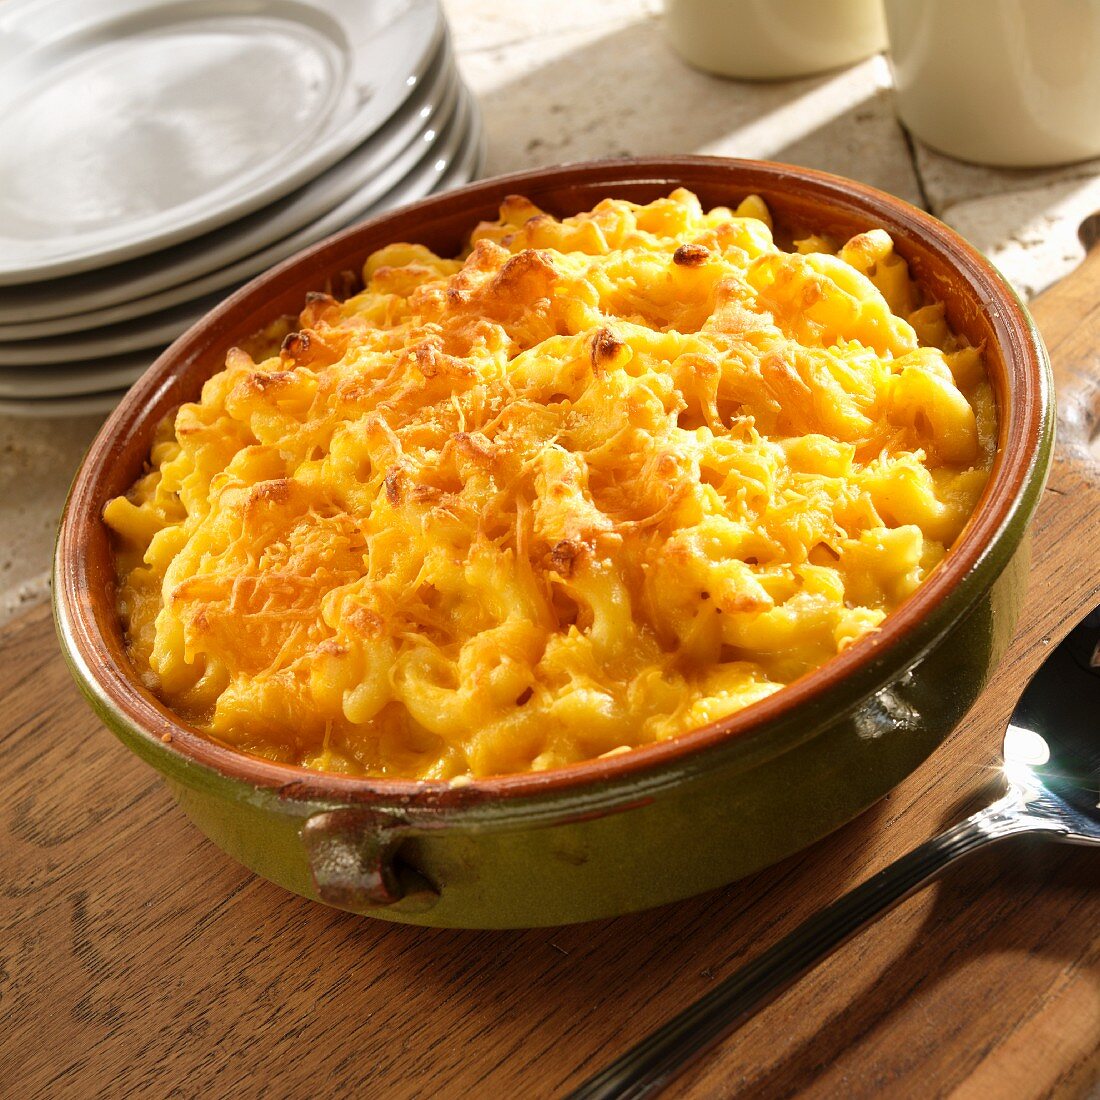 Homemade Baked Macaroni and Cheese in a Green Baking Dish